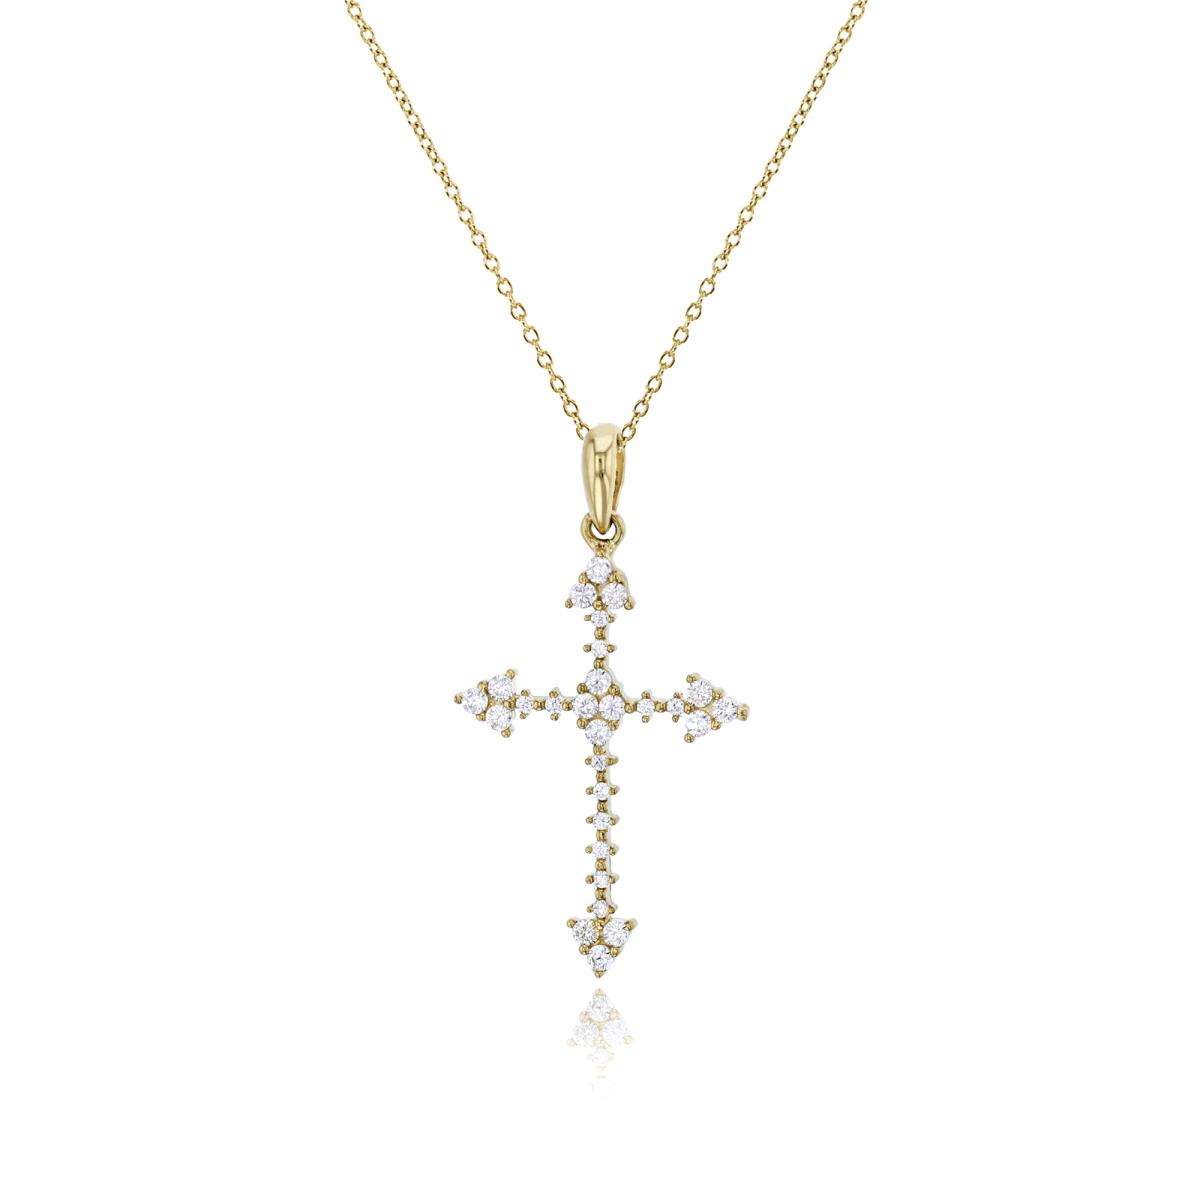 10K Yellow Gold 31x16mm Micropave Cross Dangling 18" Necklace